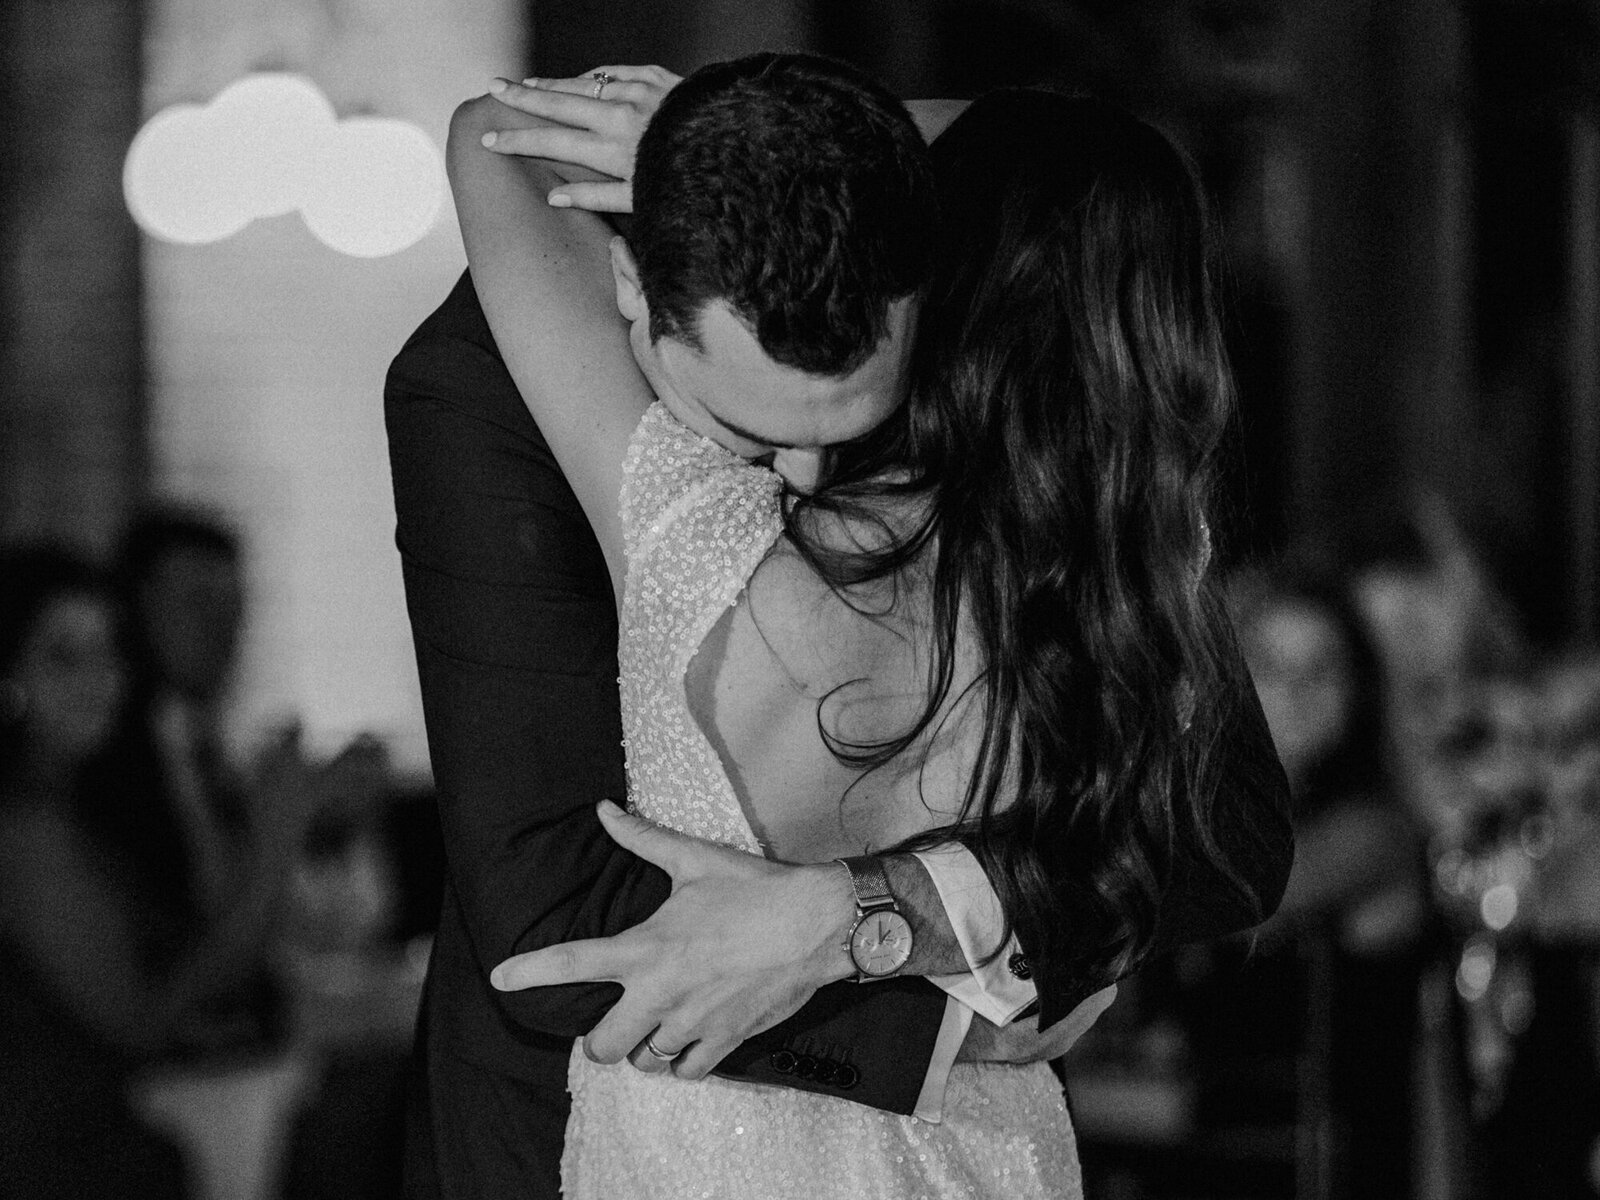 A black and white first dance photo captured at Cafe Brauer in Chicago